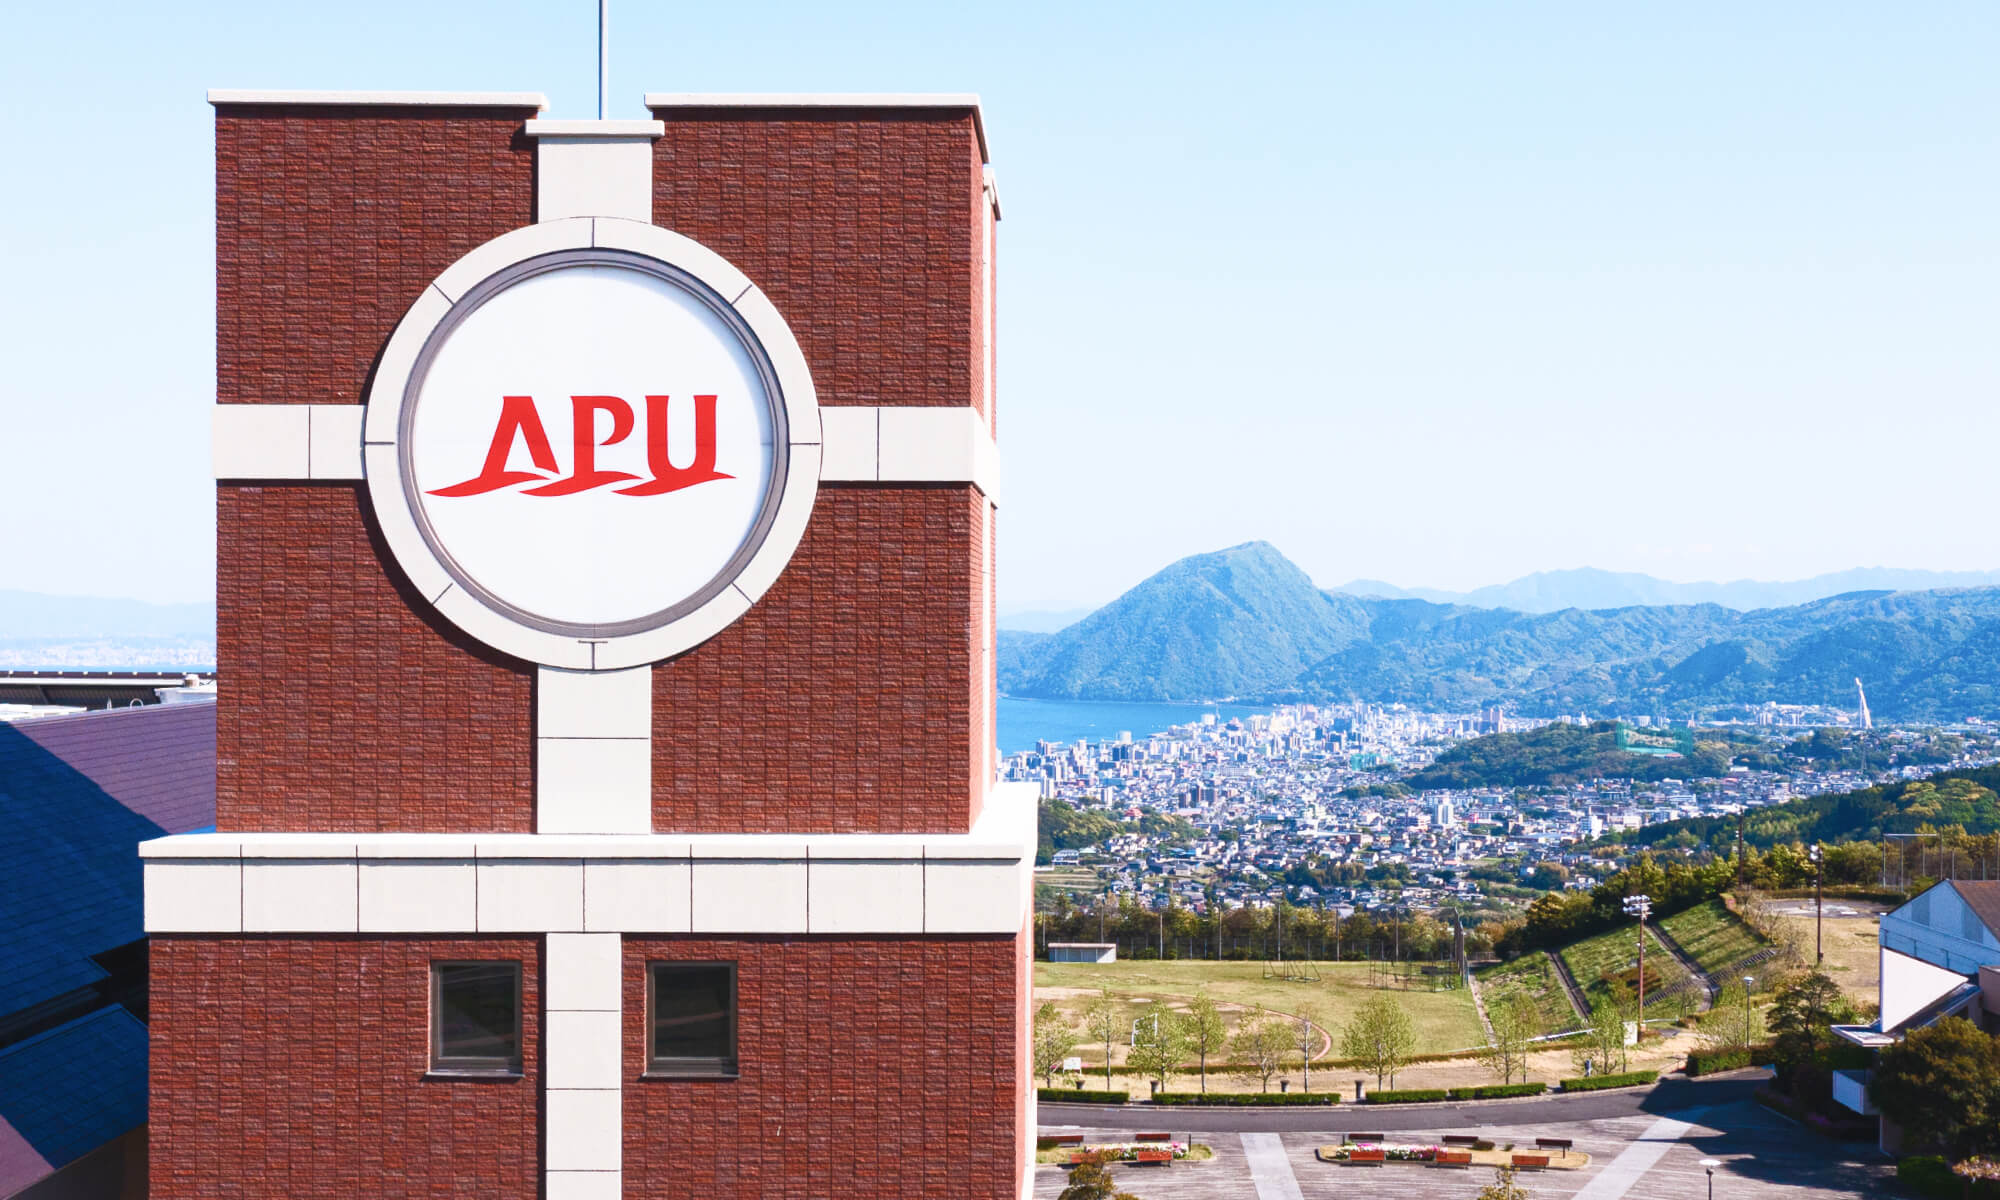 ABOUT APU